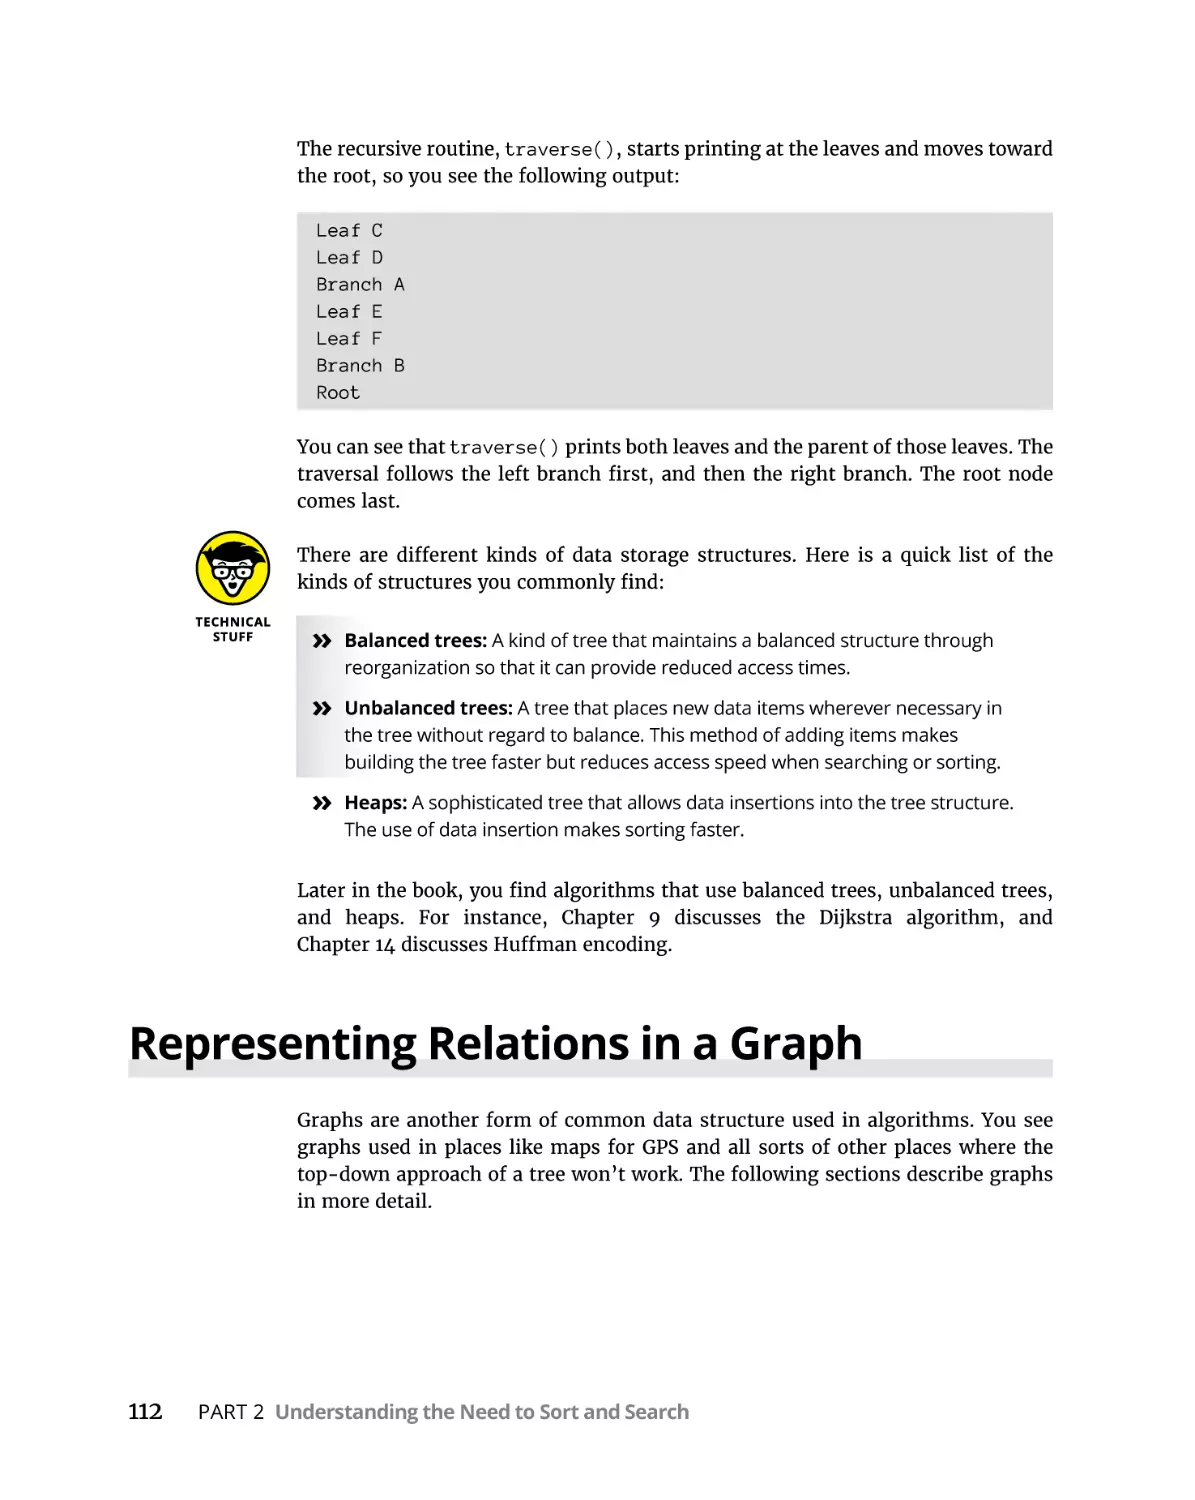 Representing Relations in a Graph